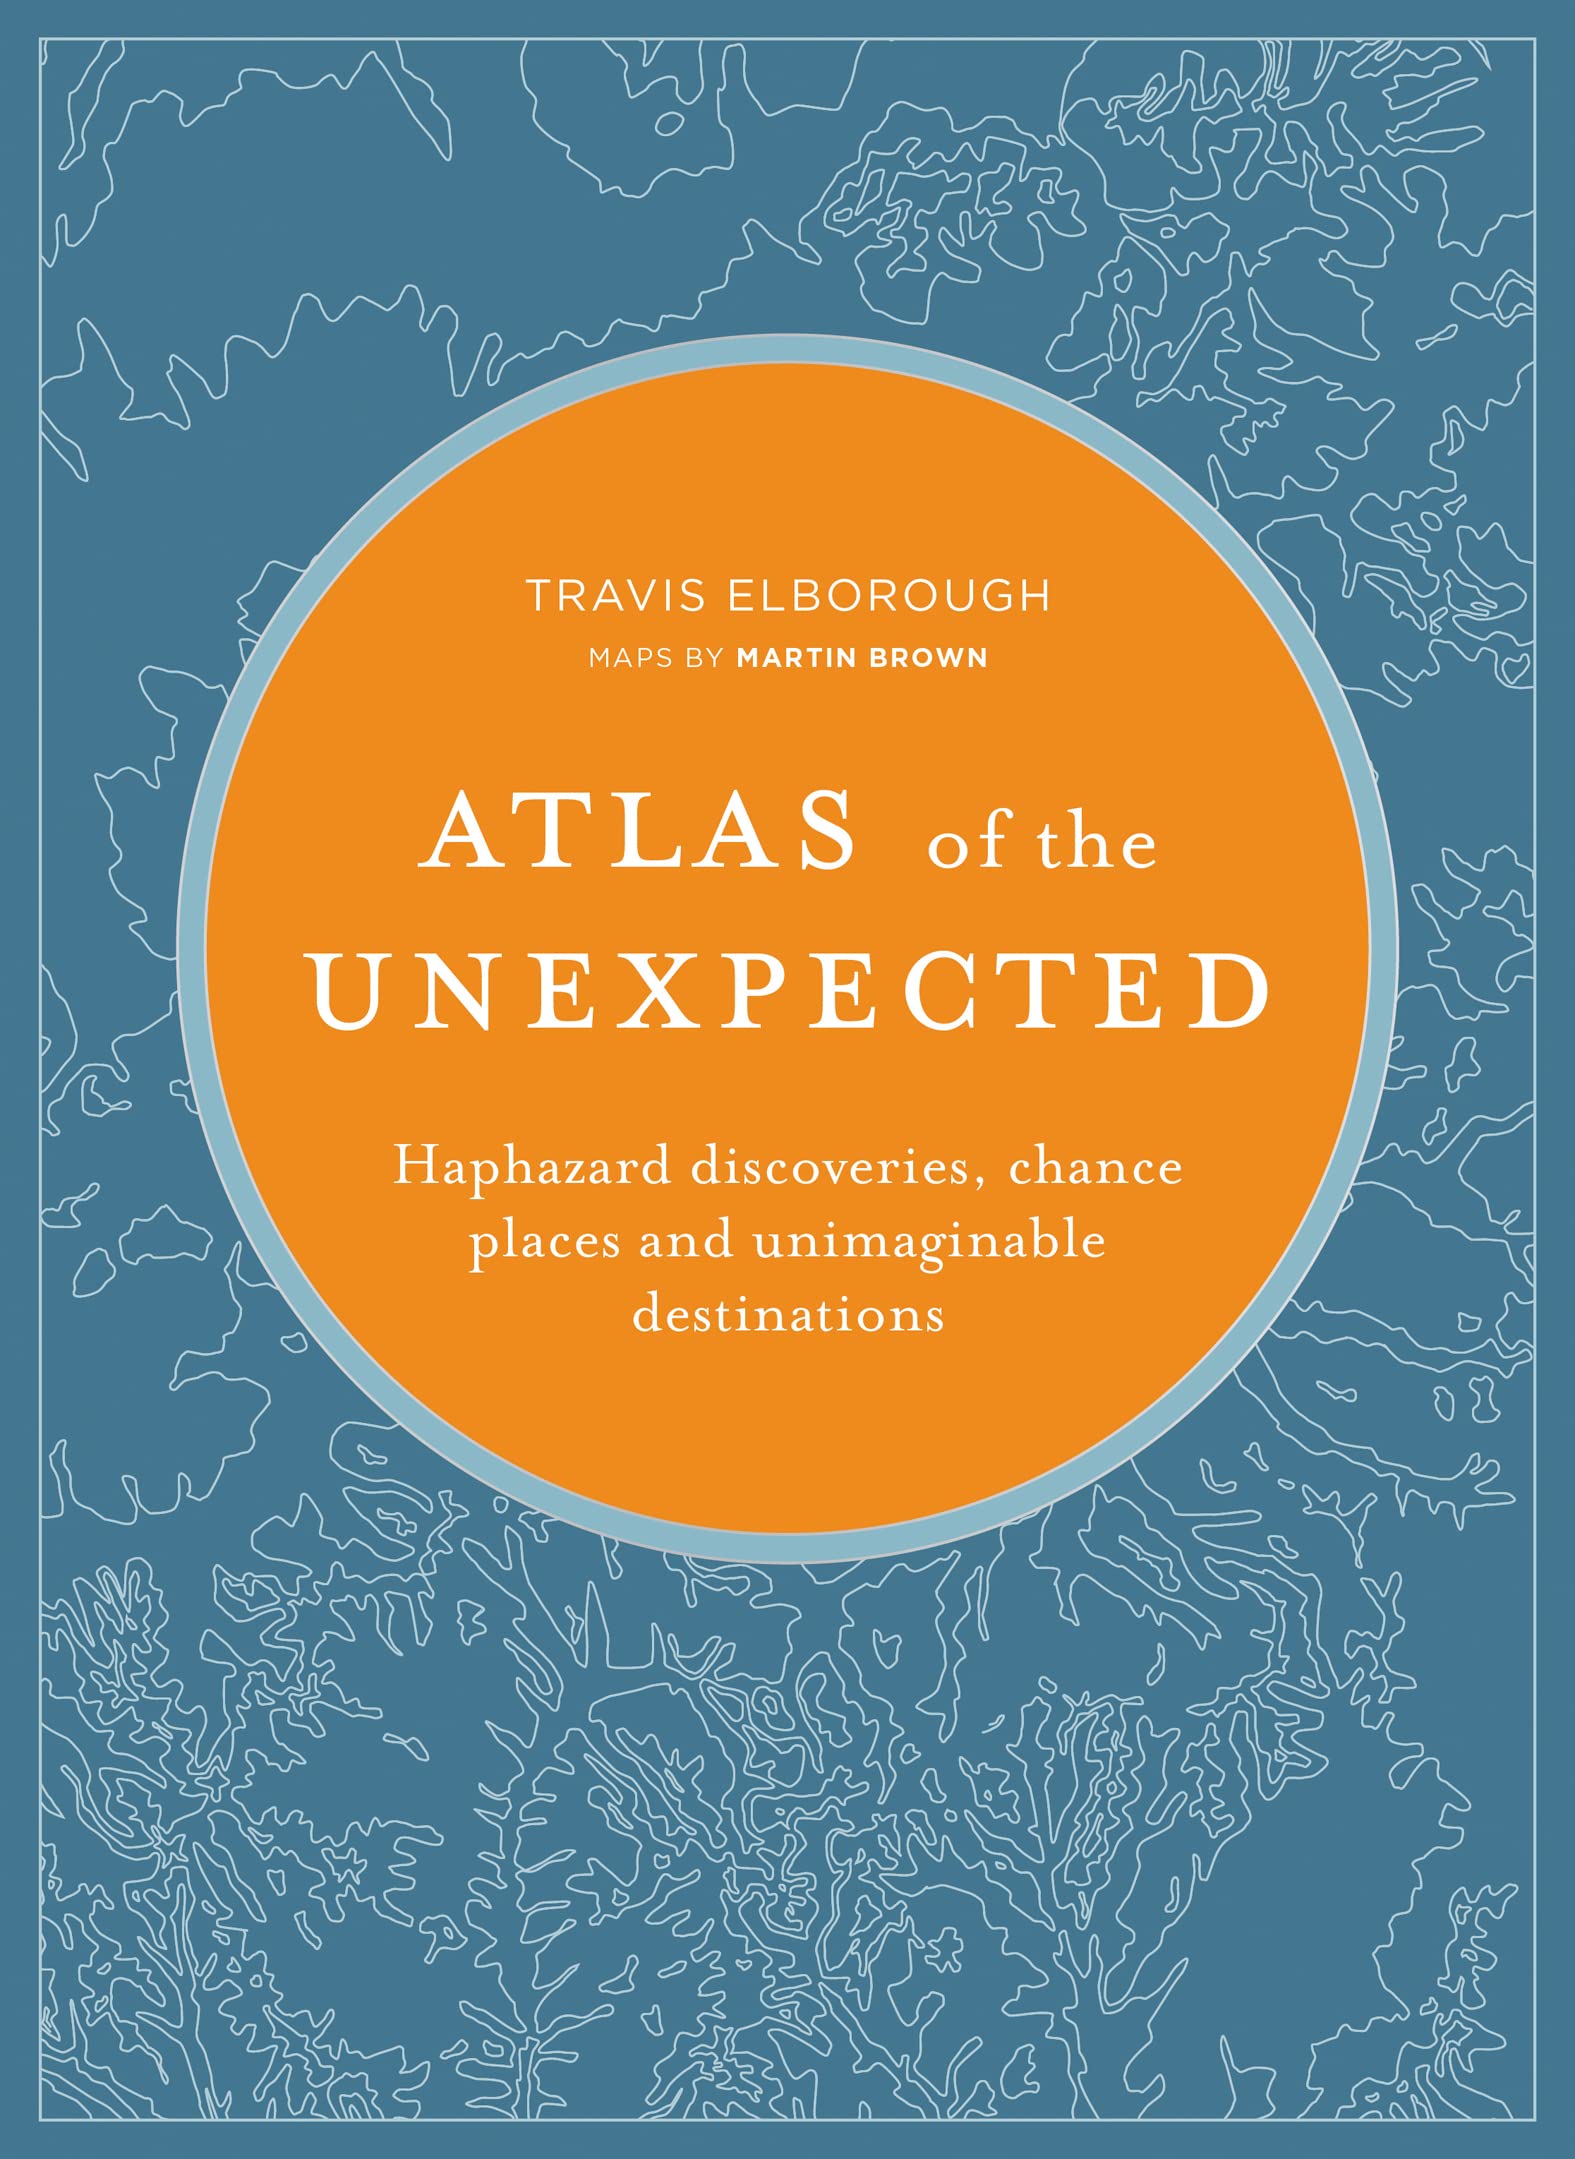 Atlas of the Unexpected: Haphazard Discoveries, Chance Places and Unimaginable Destinations (Unexpected Atlases)